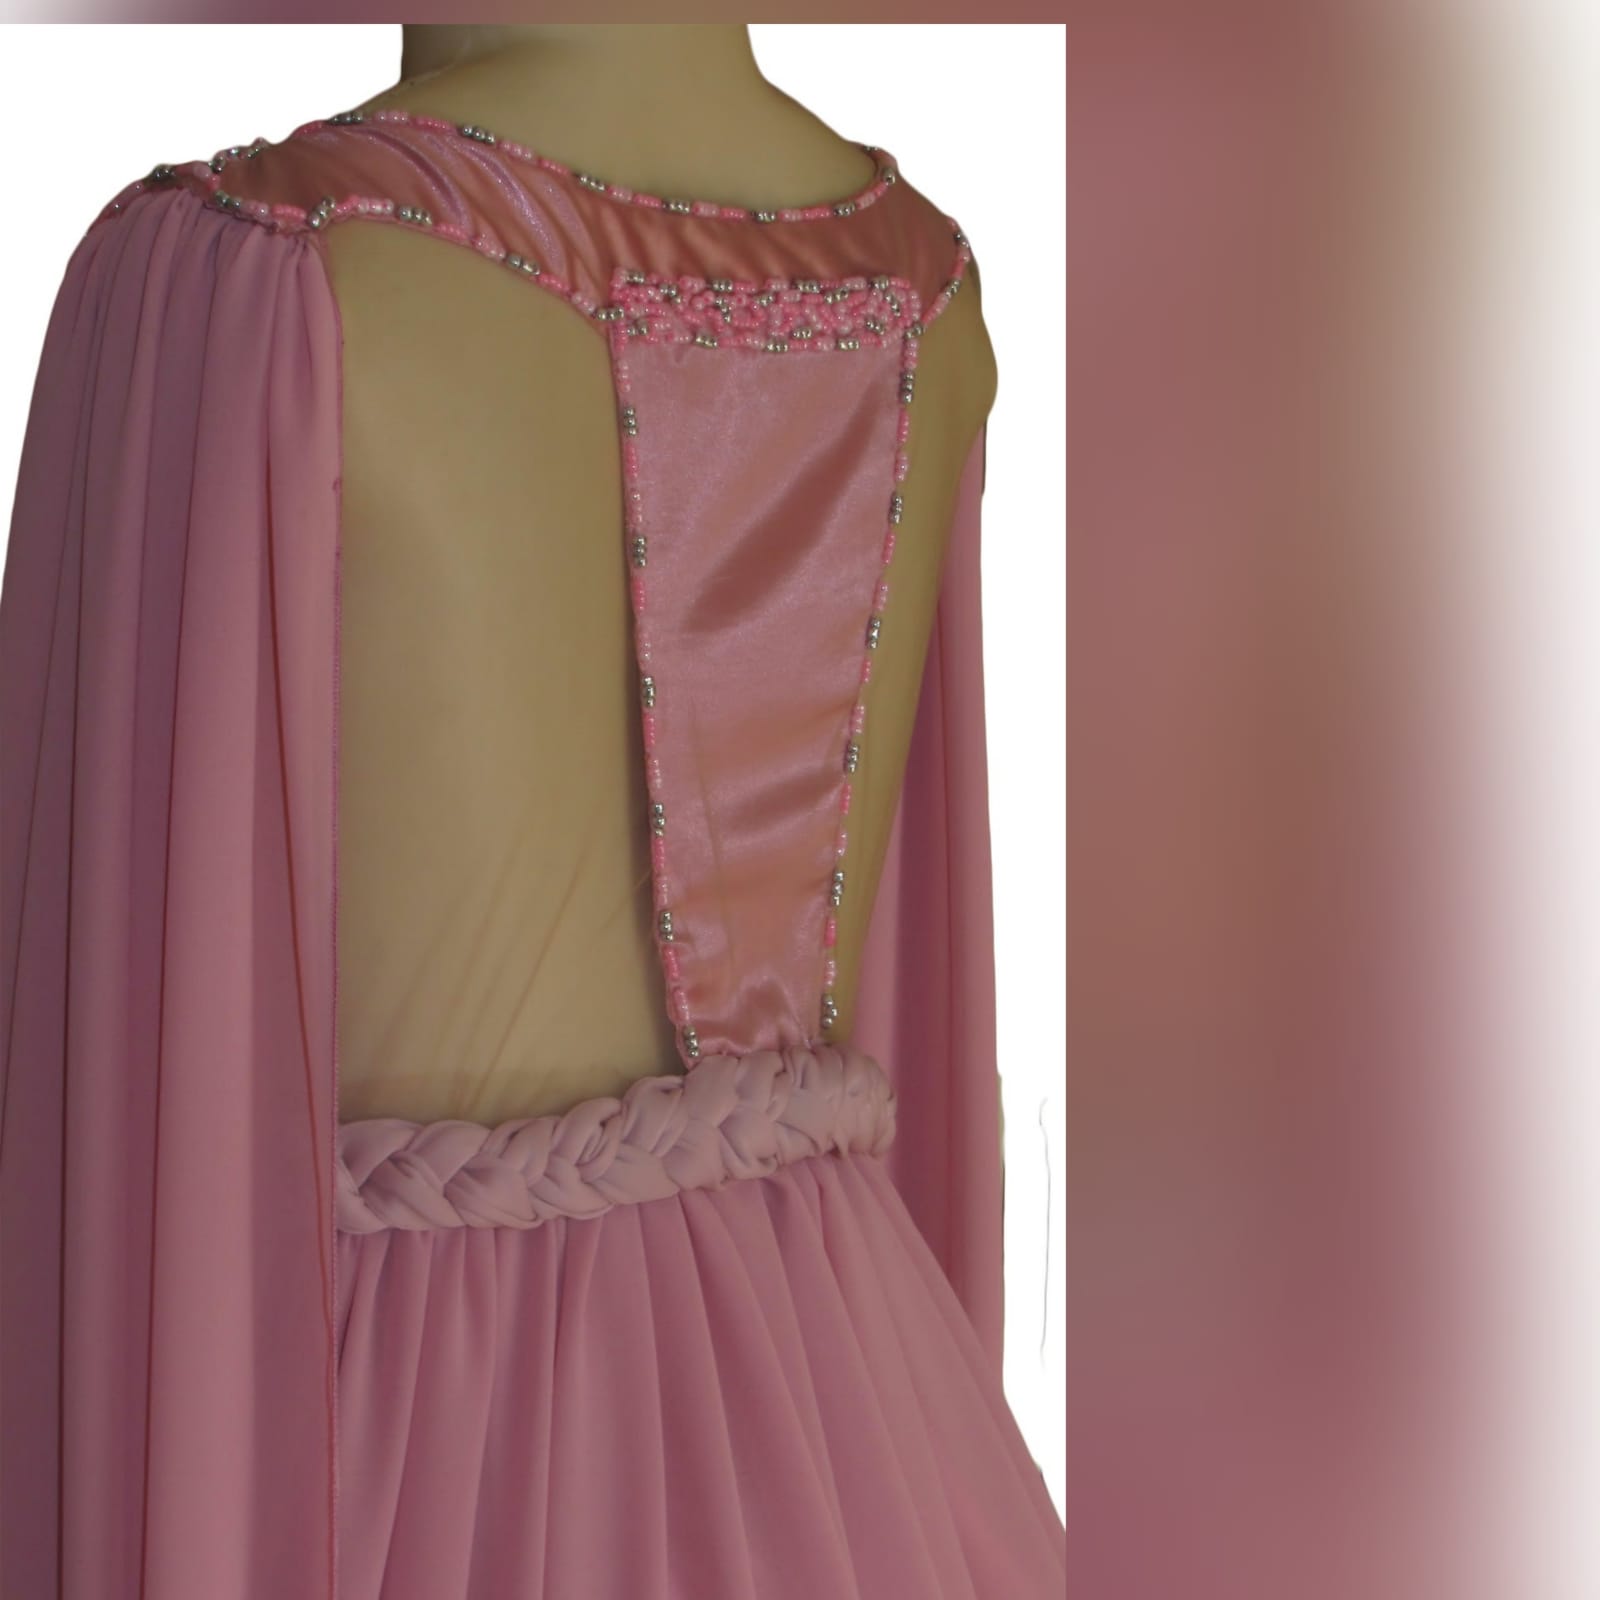 Dusty pink chiffon beaded prom dress 2 dusty pink chiffon beaded prom dress, bateau neckline effect with an illusion back, fully beaded bodice, plaited belt detail with a slit and a train. Shoulders with chiffon draping creating a goddess look.